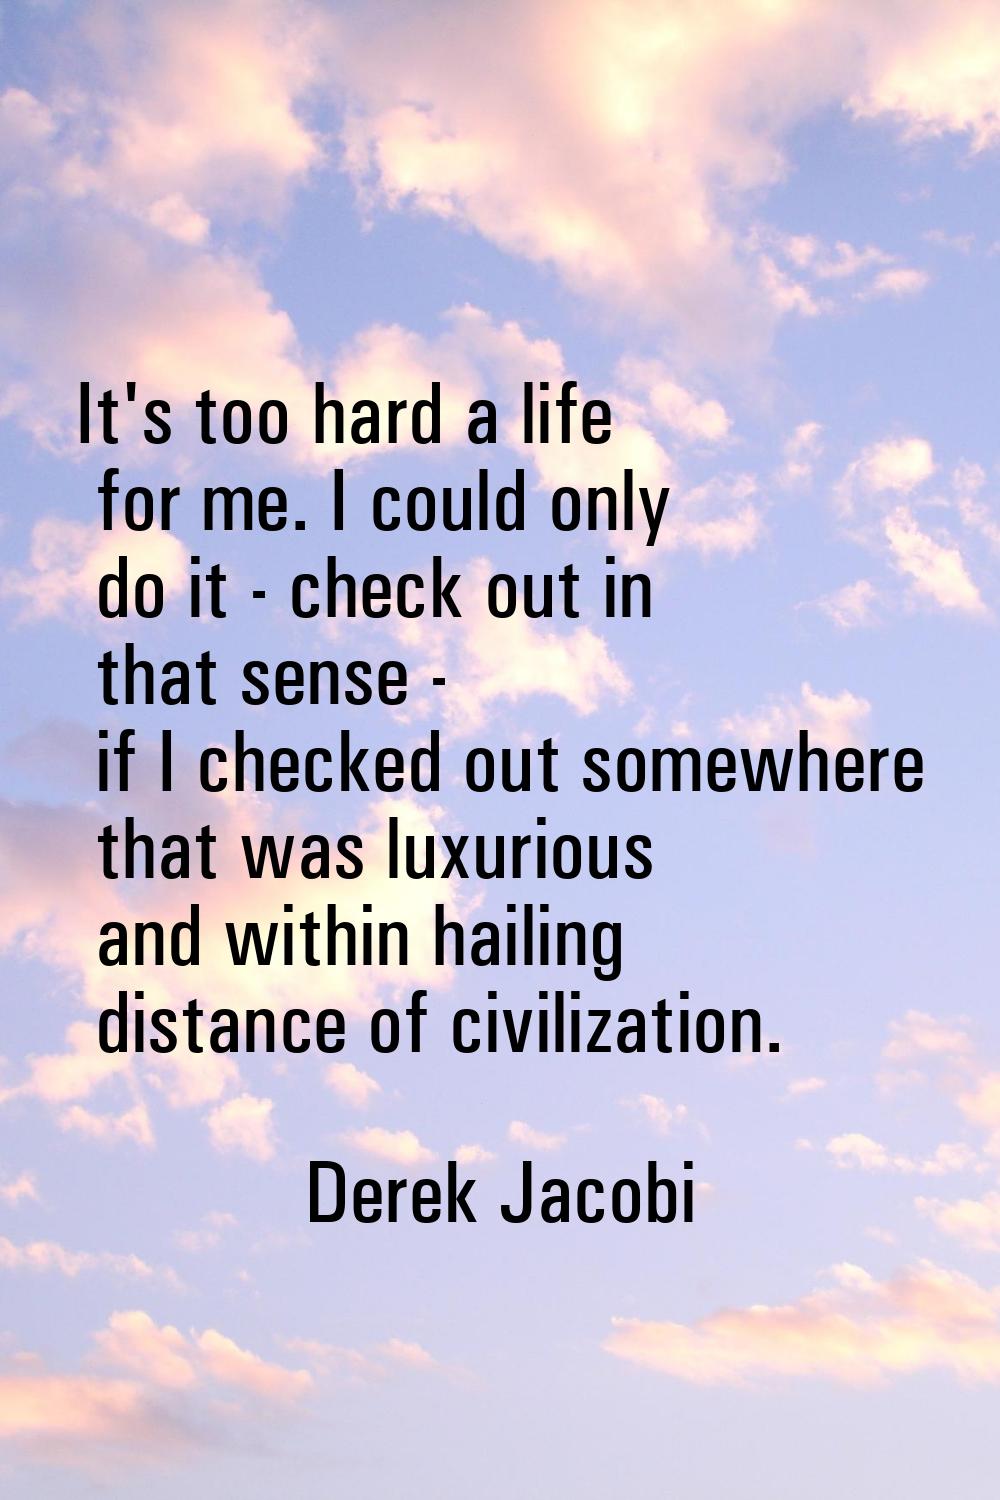 It's too hard a life for me. I could only do it - check out in that sense - if I checked out somewh